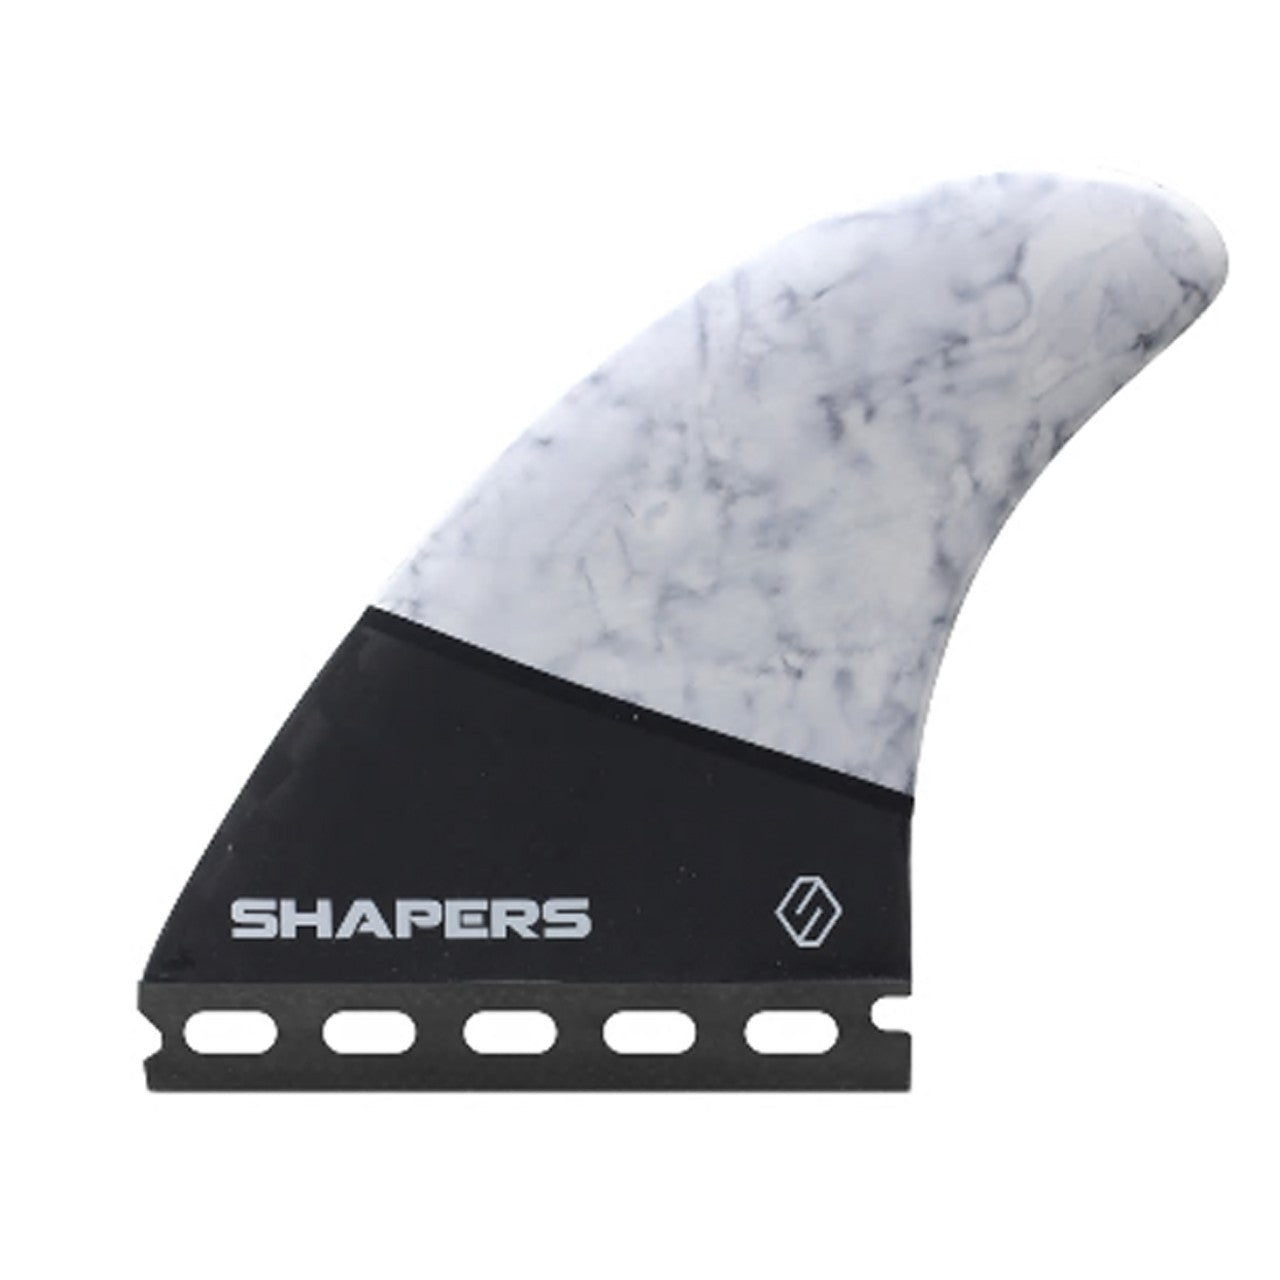 Shapers Carbon Pivot Thruster Fins (Futures) – Large